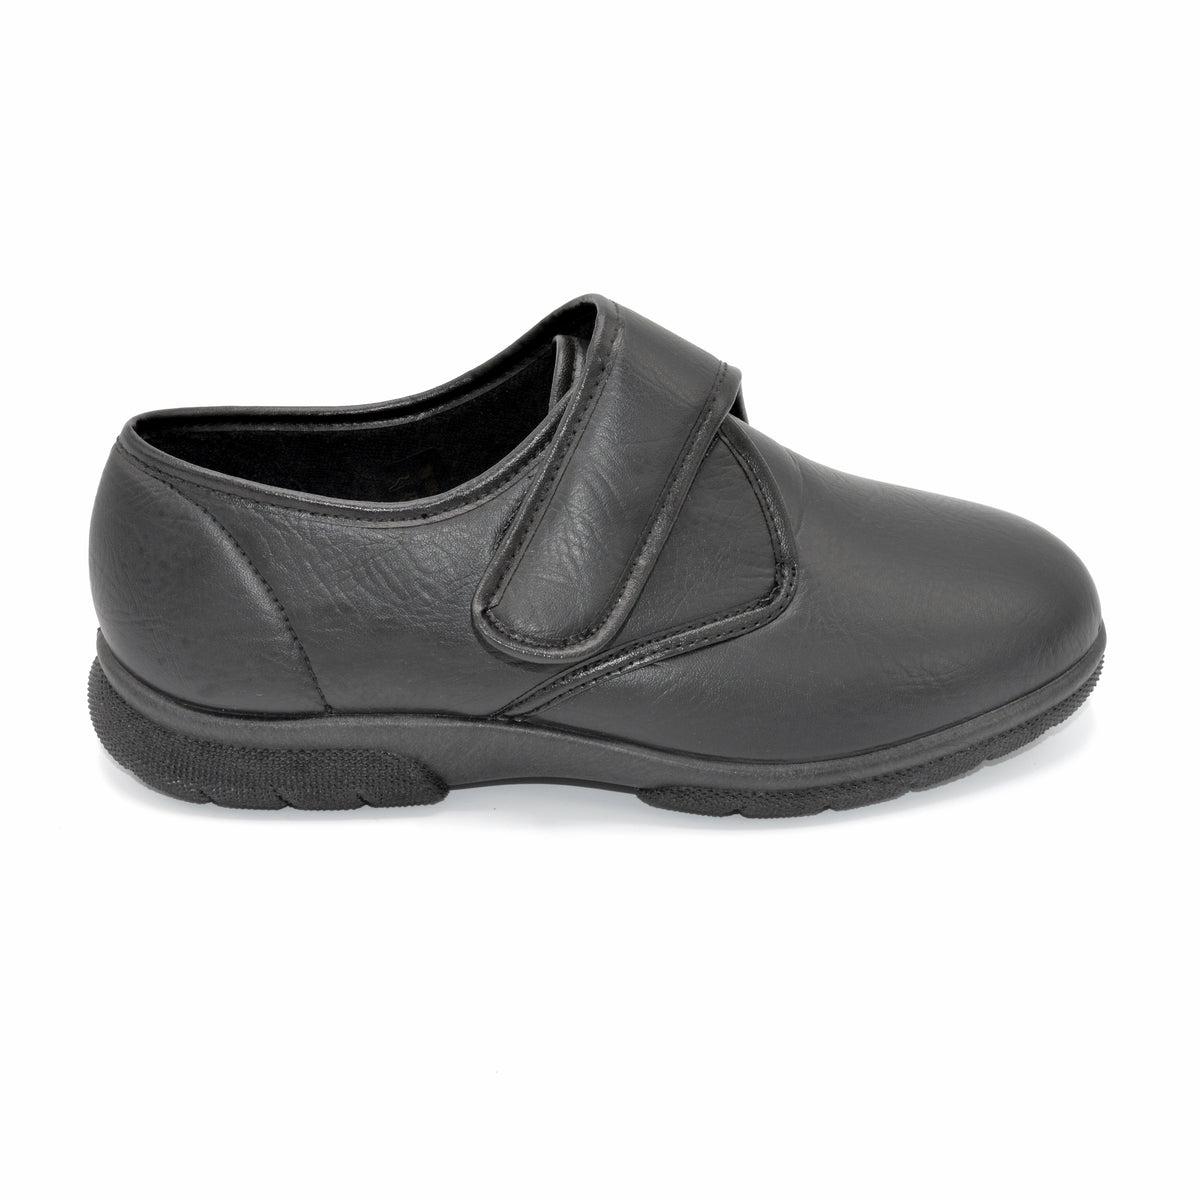 Mens Wide Fit Shoes For Very Swollen Feet | Oedema — Wide Shoes